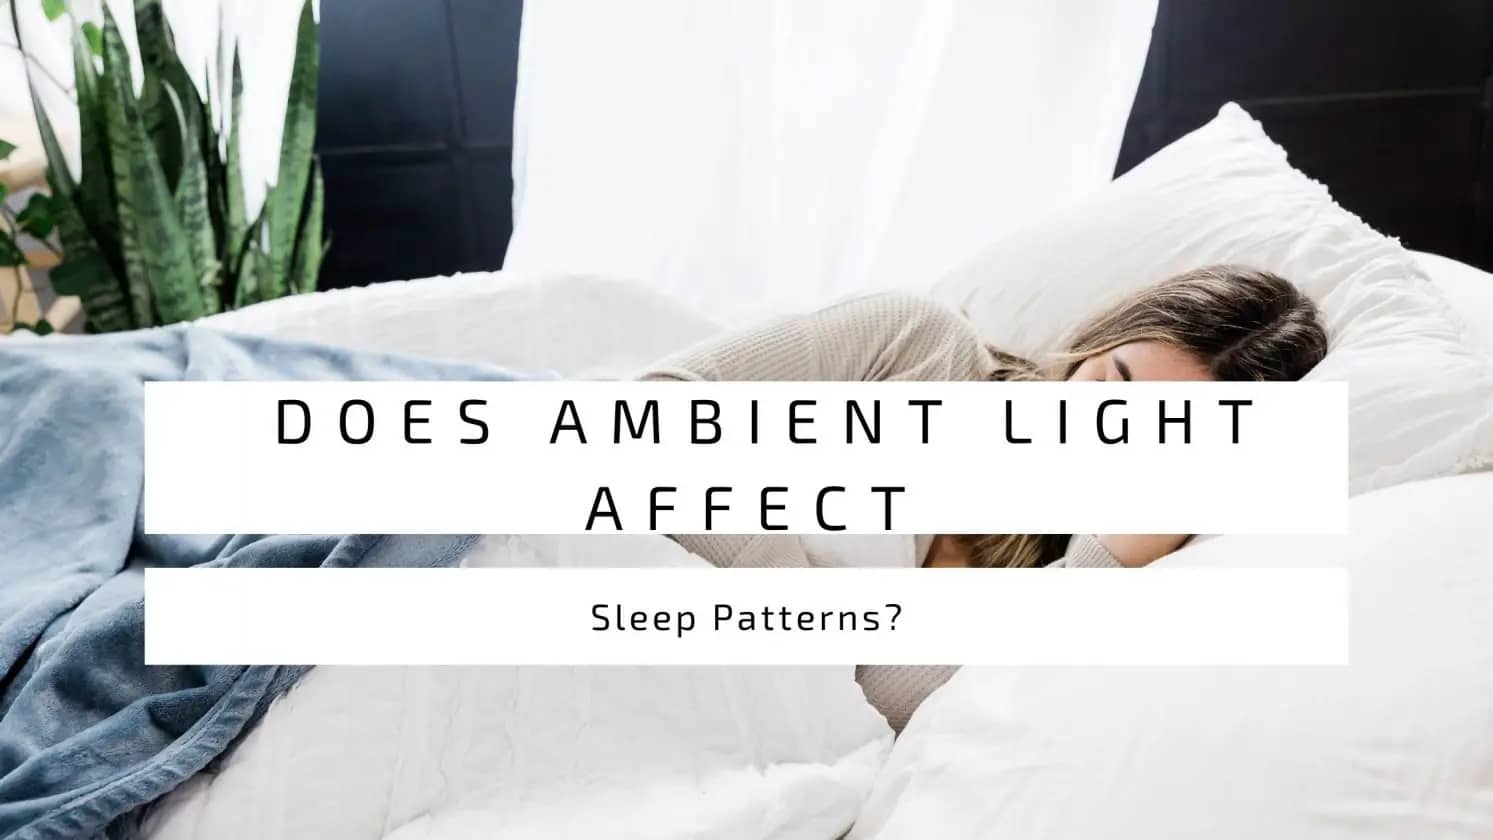 Does Ambient Light Affect Sleep Patterns?